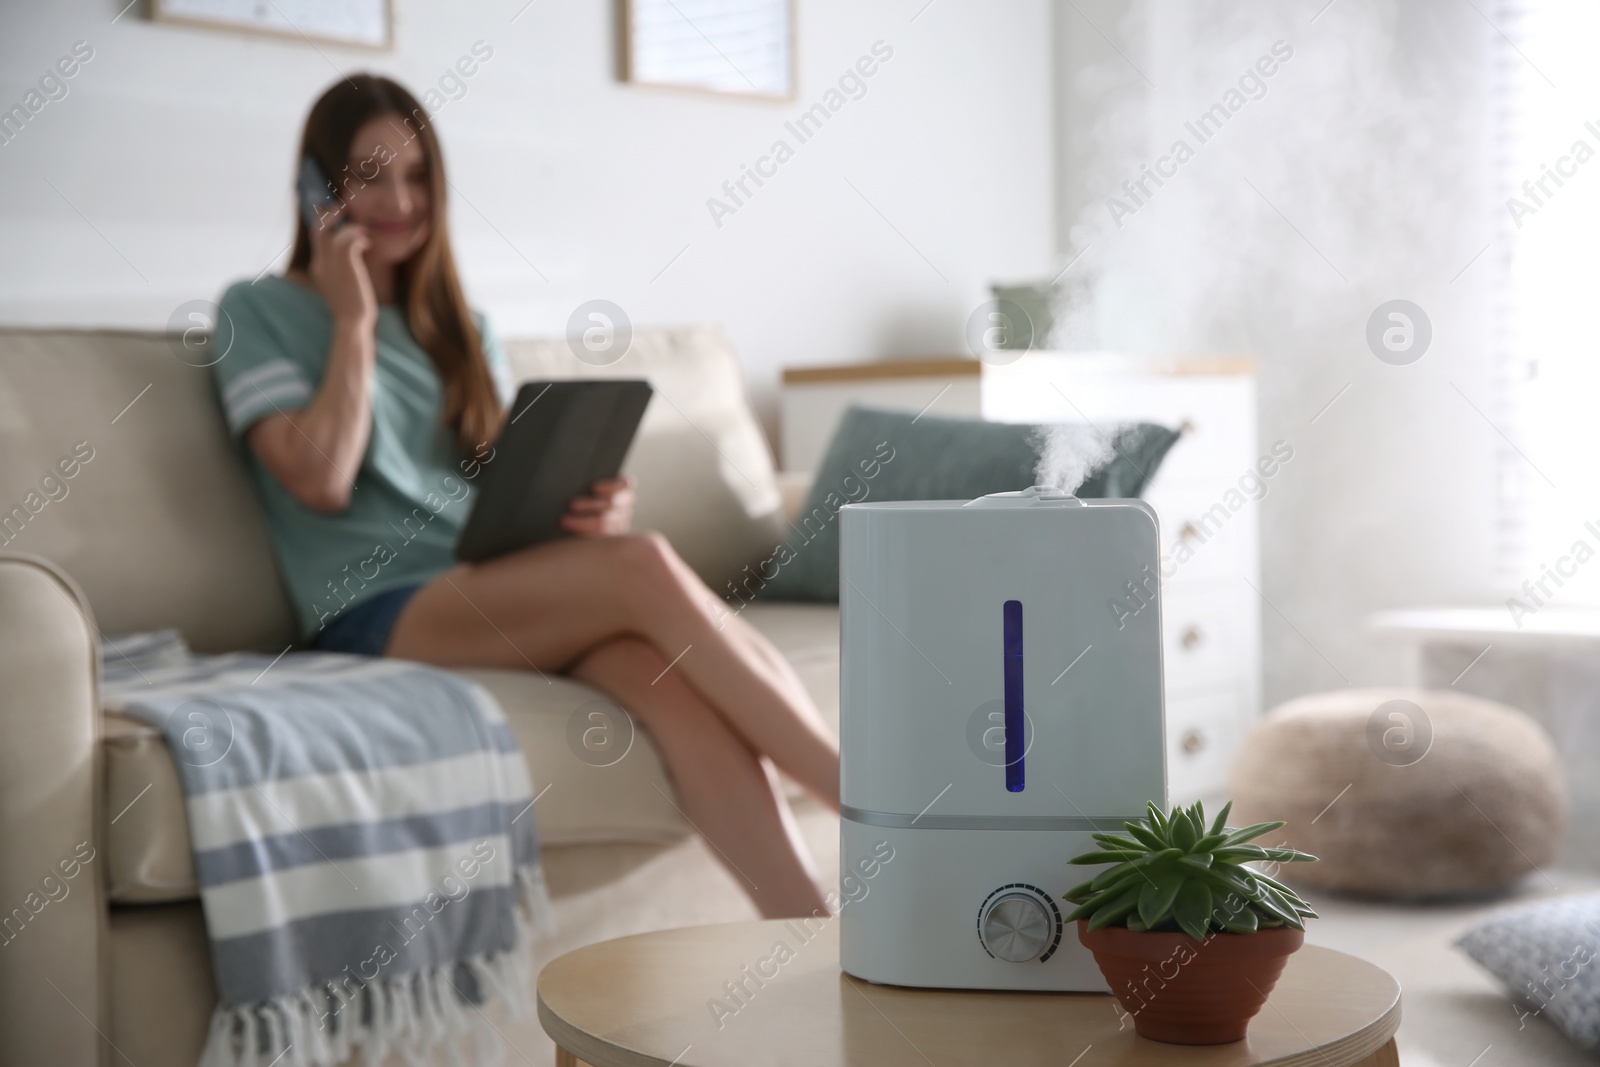 Photo of Modern air humidifier and blurred woman on background